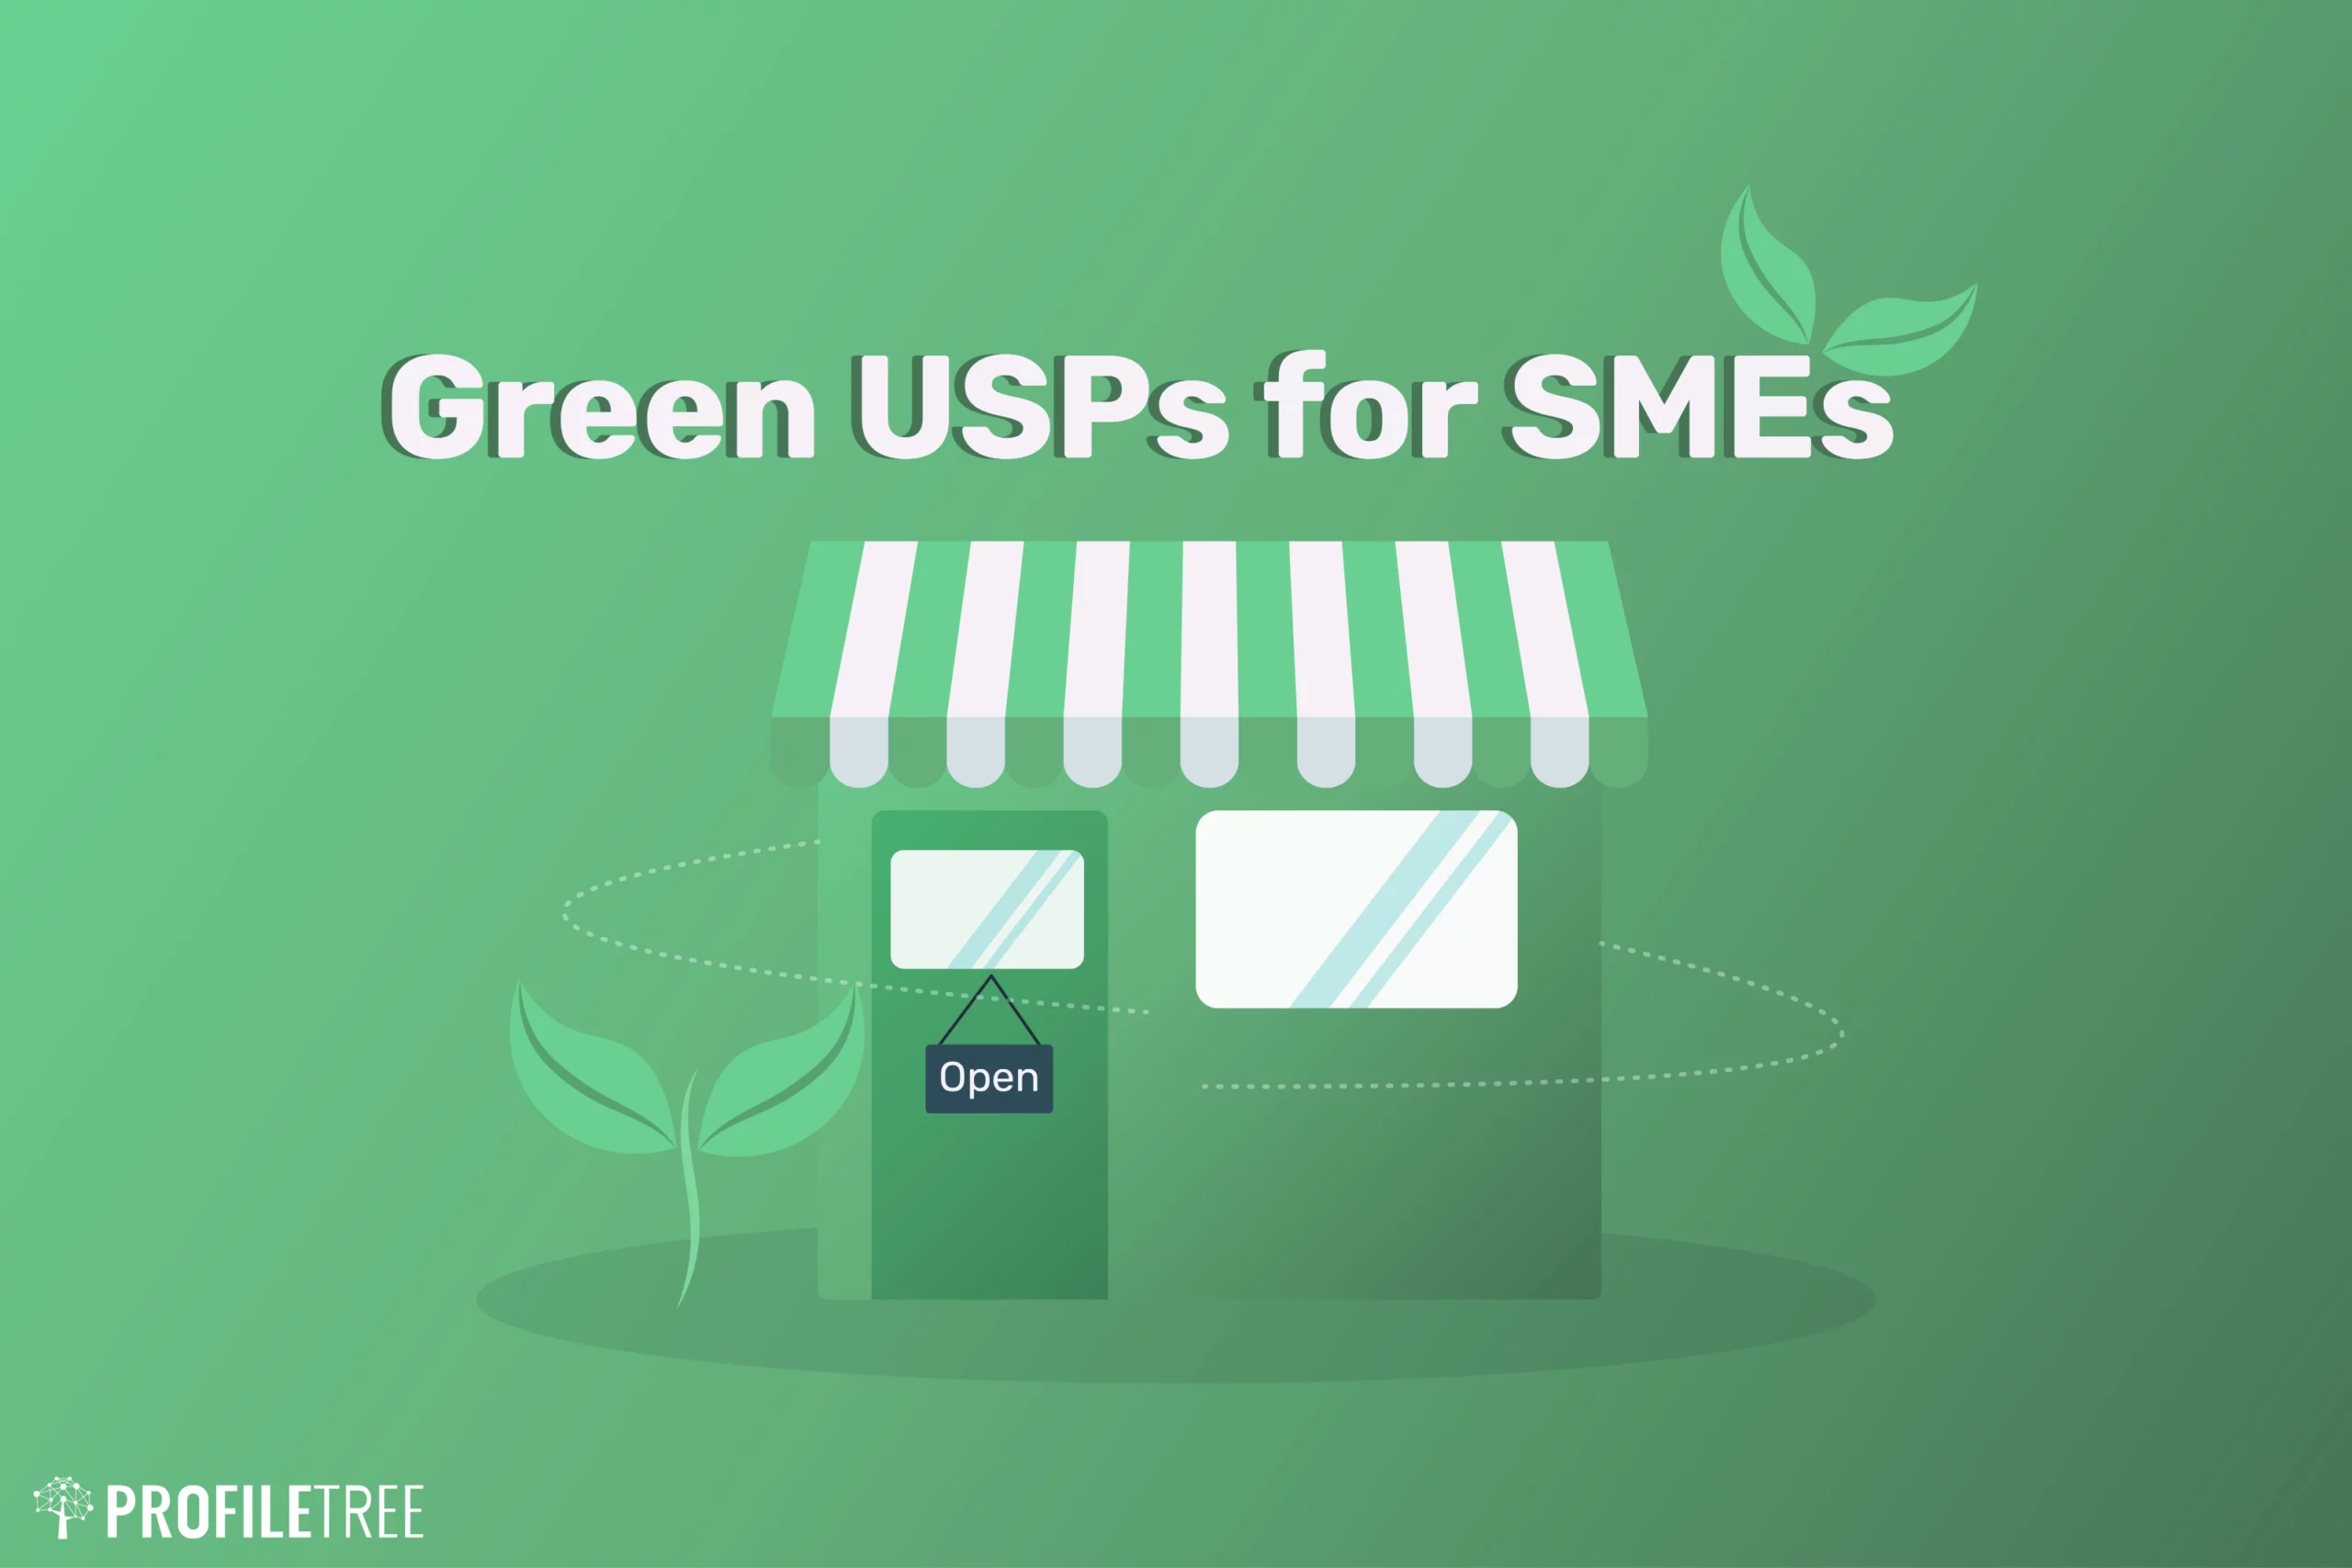 Green USPs for SMEs